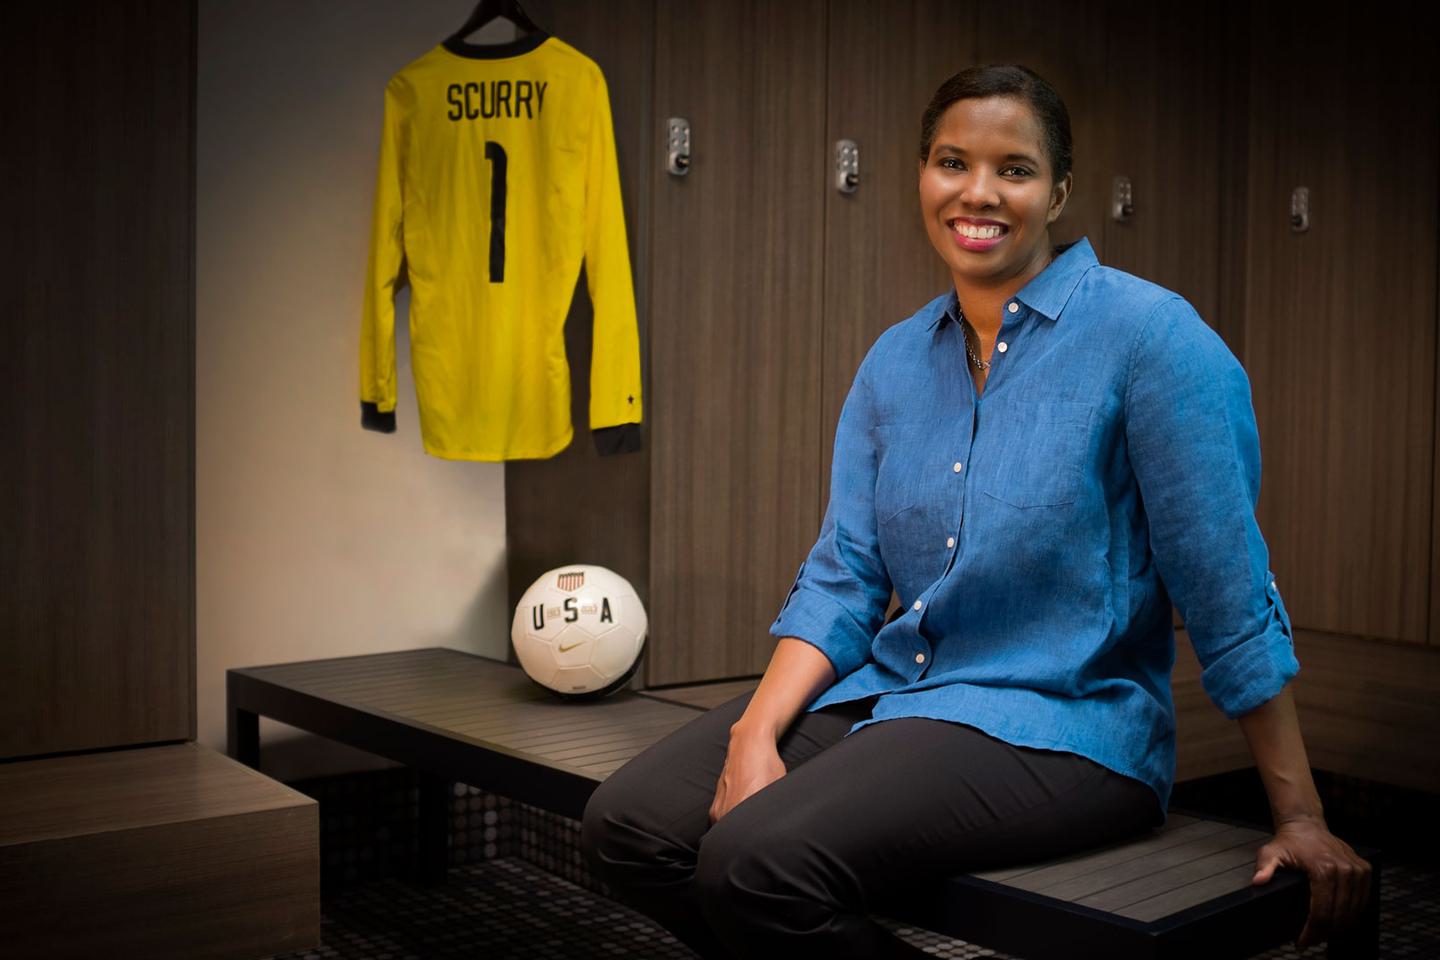 Briana Scurry posing on a bench with a soccer ball and jersey next to her